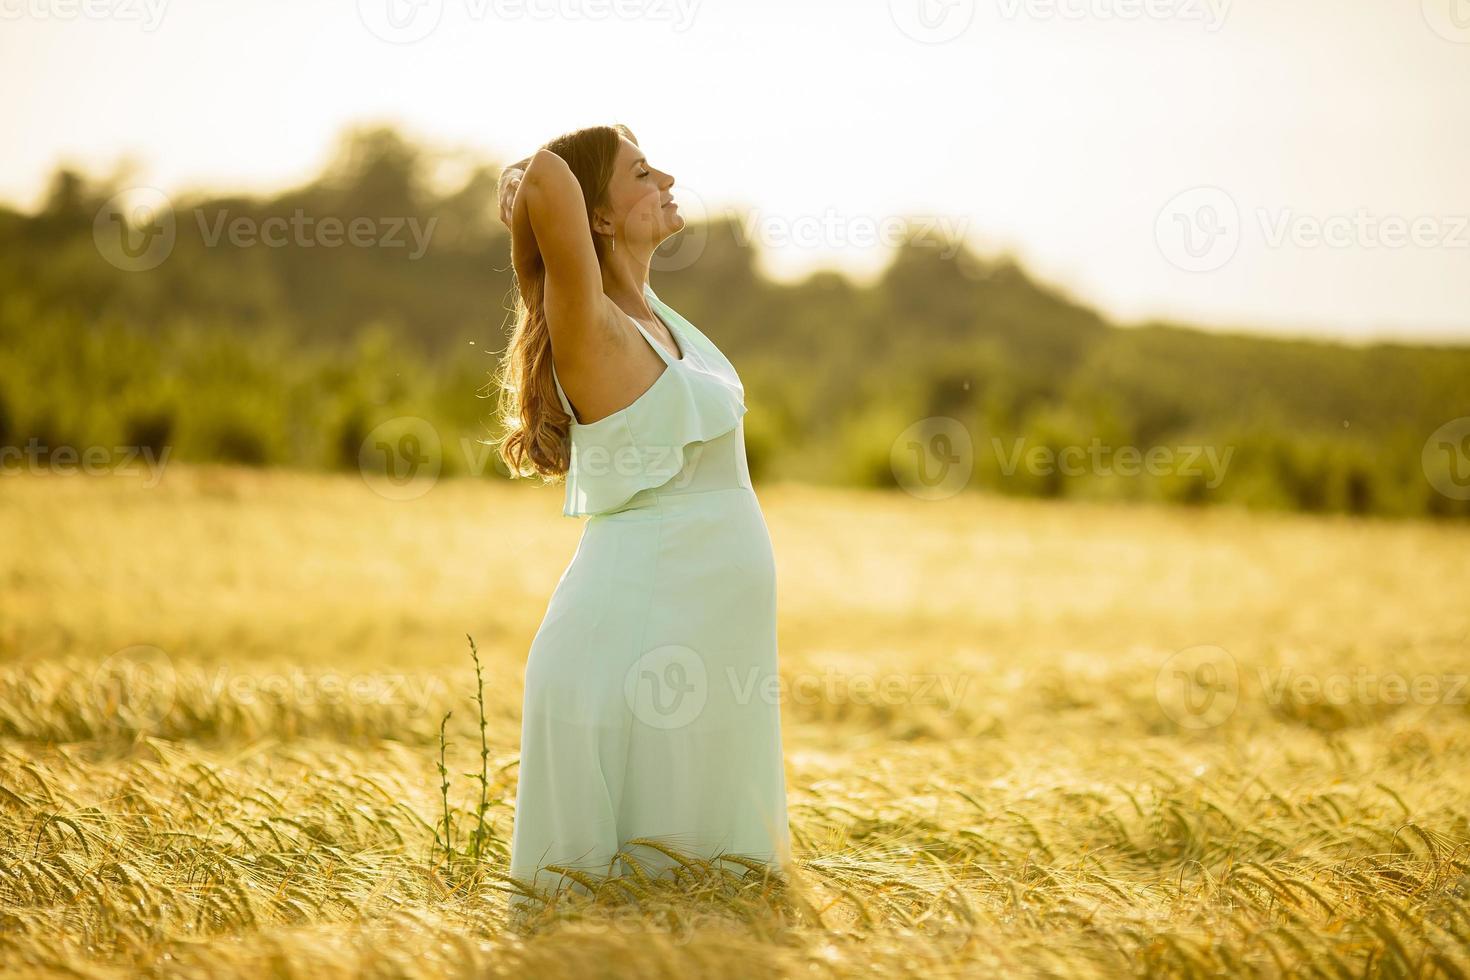 Pregnant woman posed in a field photo